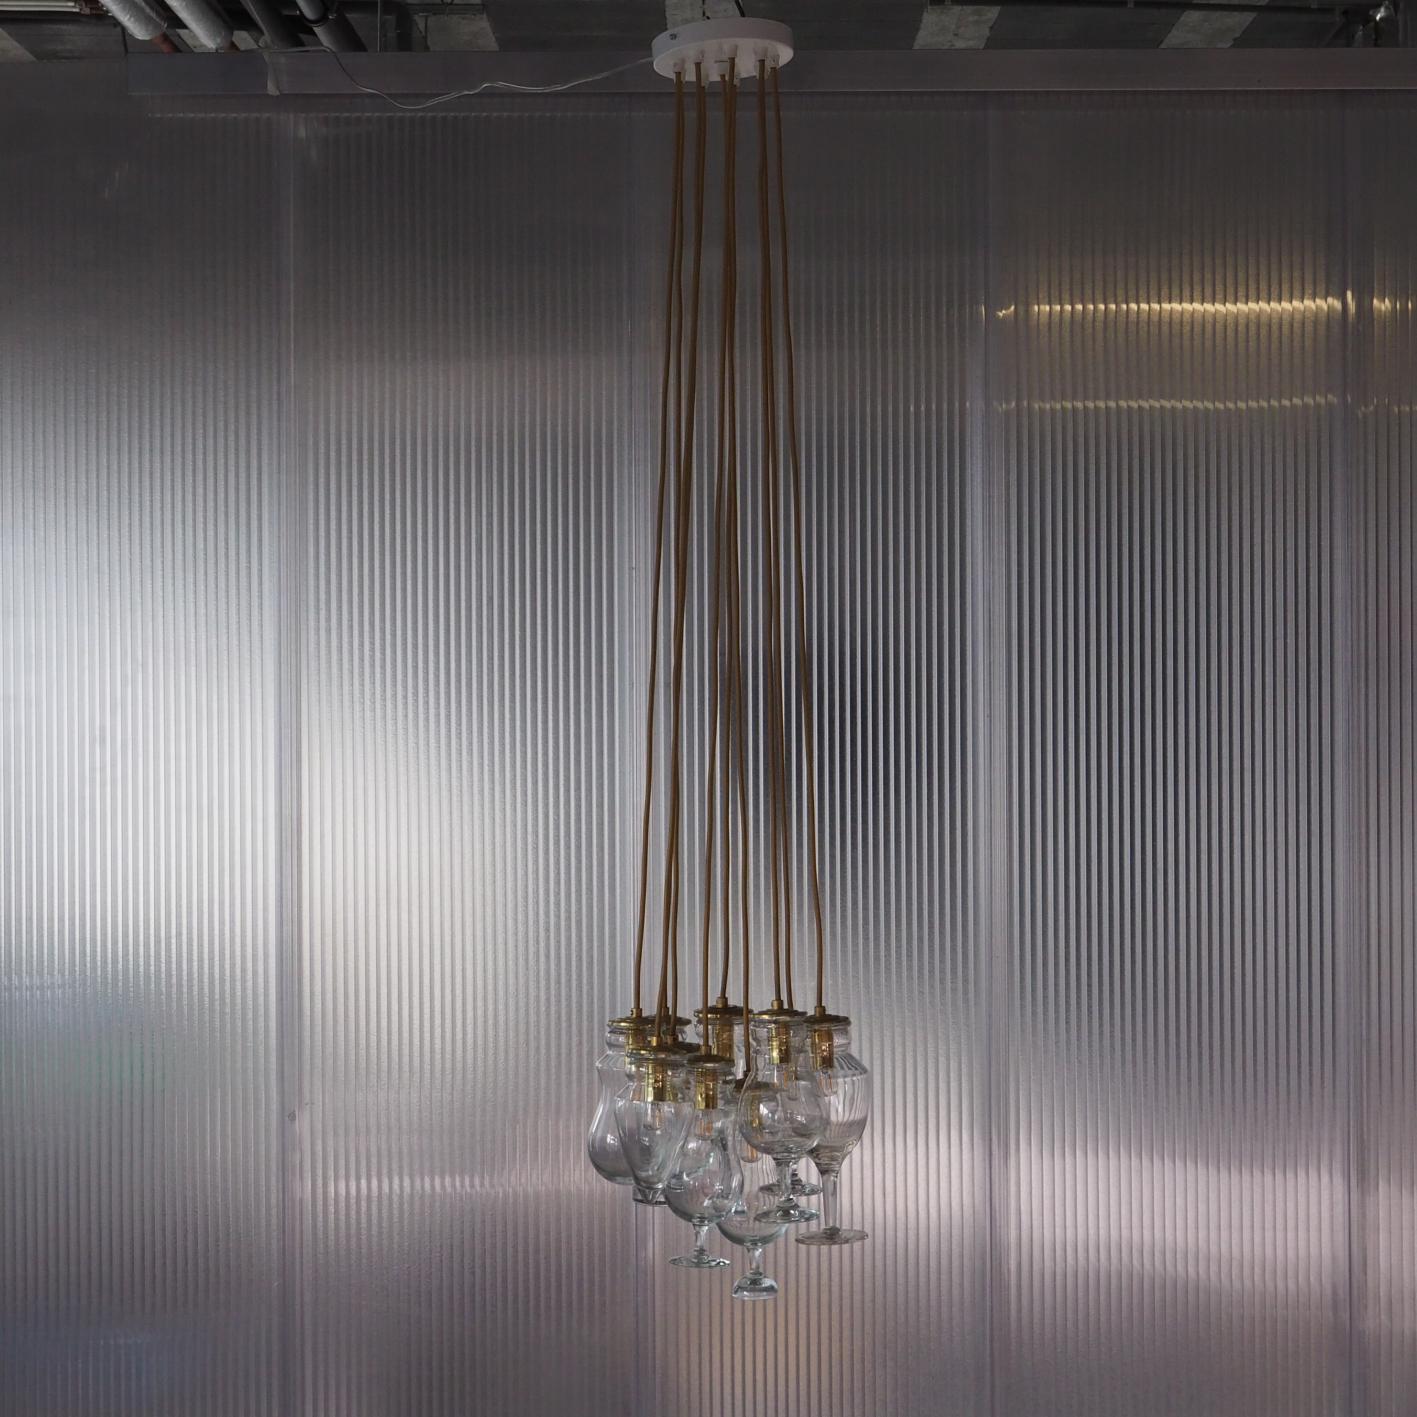 Cascade hanging light with 10 glasses from Durobor factory